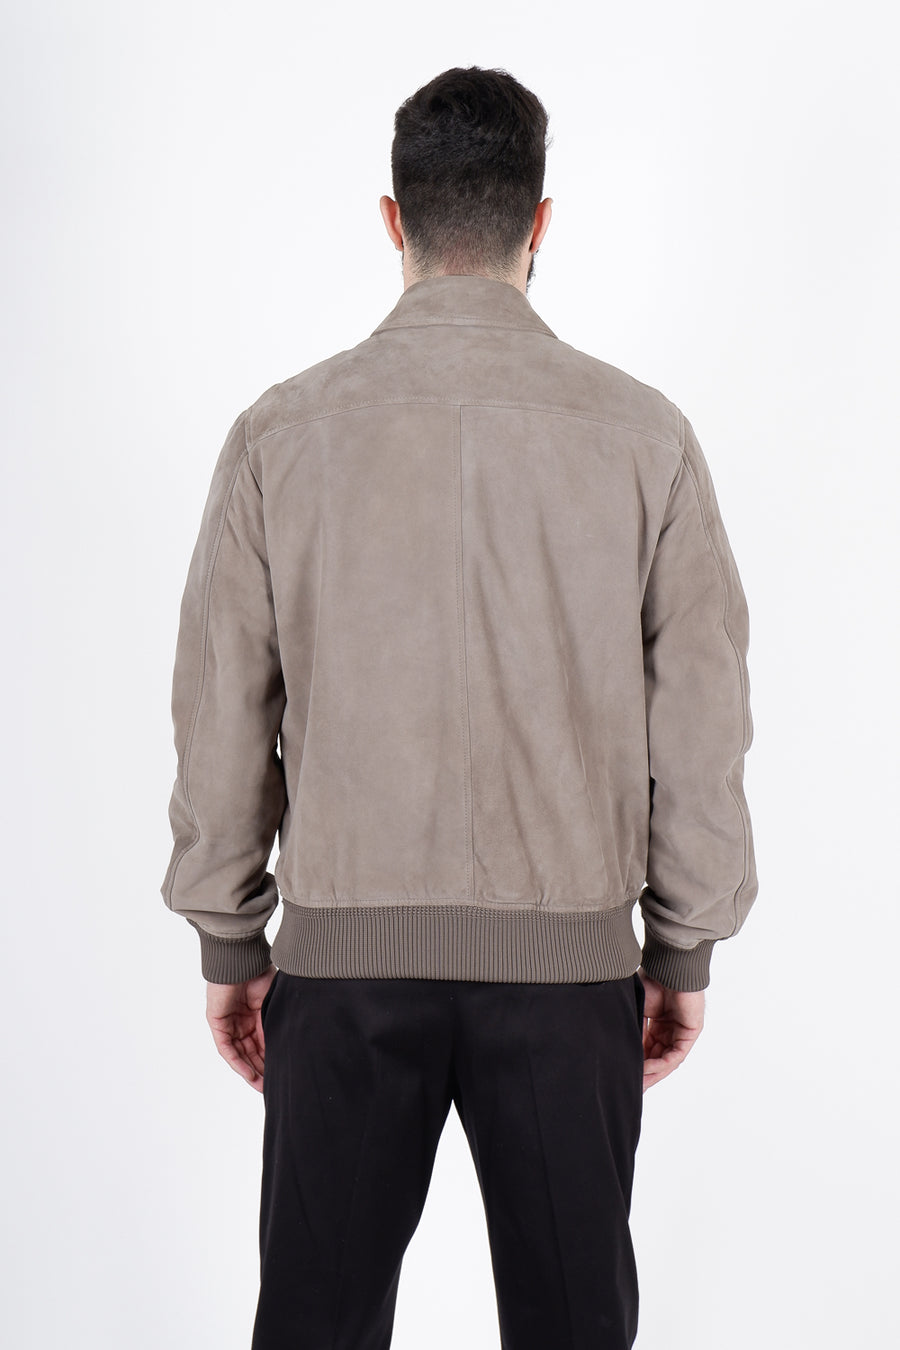 Buy the PT Torino Italian Suede Bomber Jacket Grey at Intro. Spend £50 for free UK delivery. Official stockists. We ship worldwide.